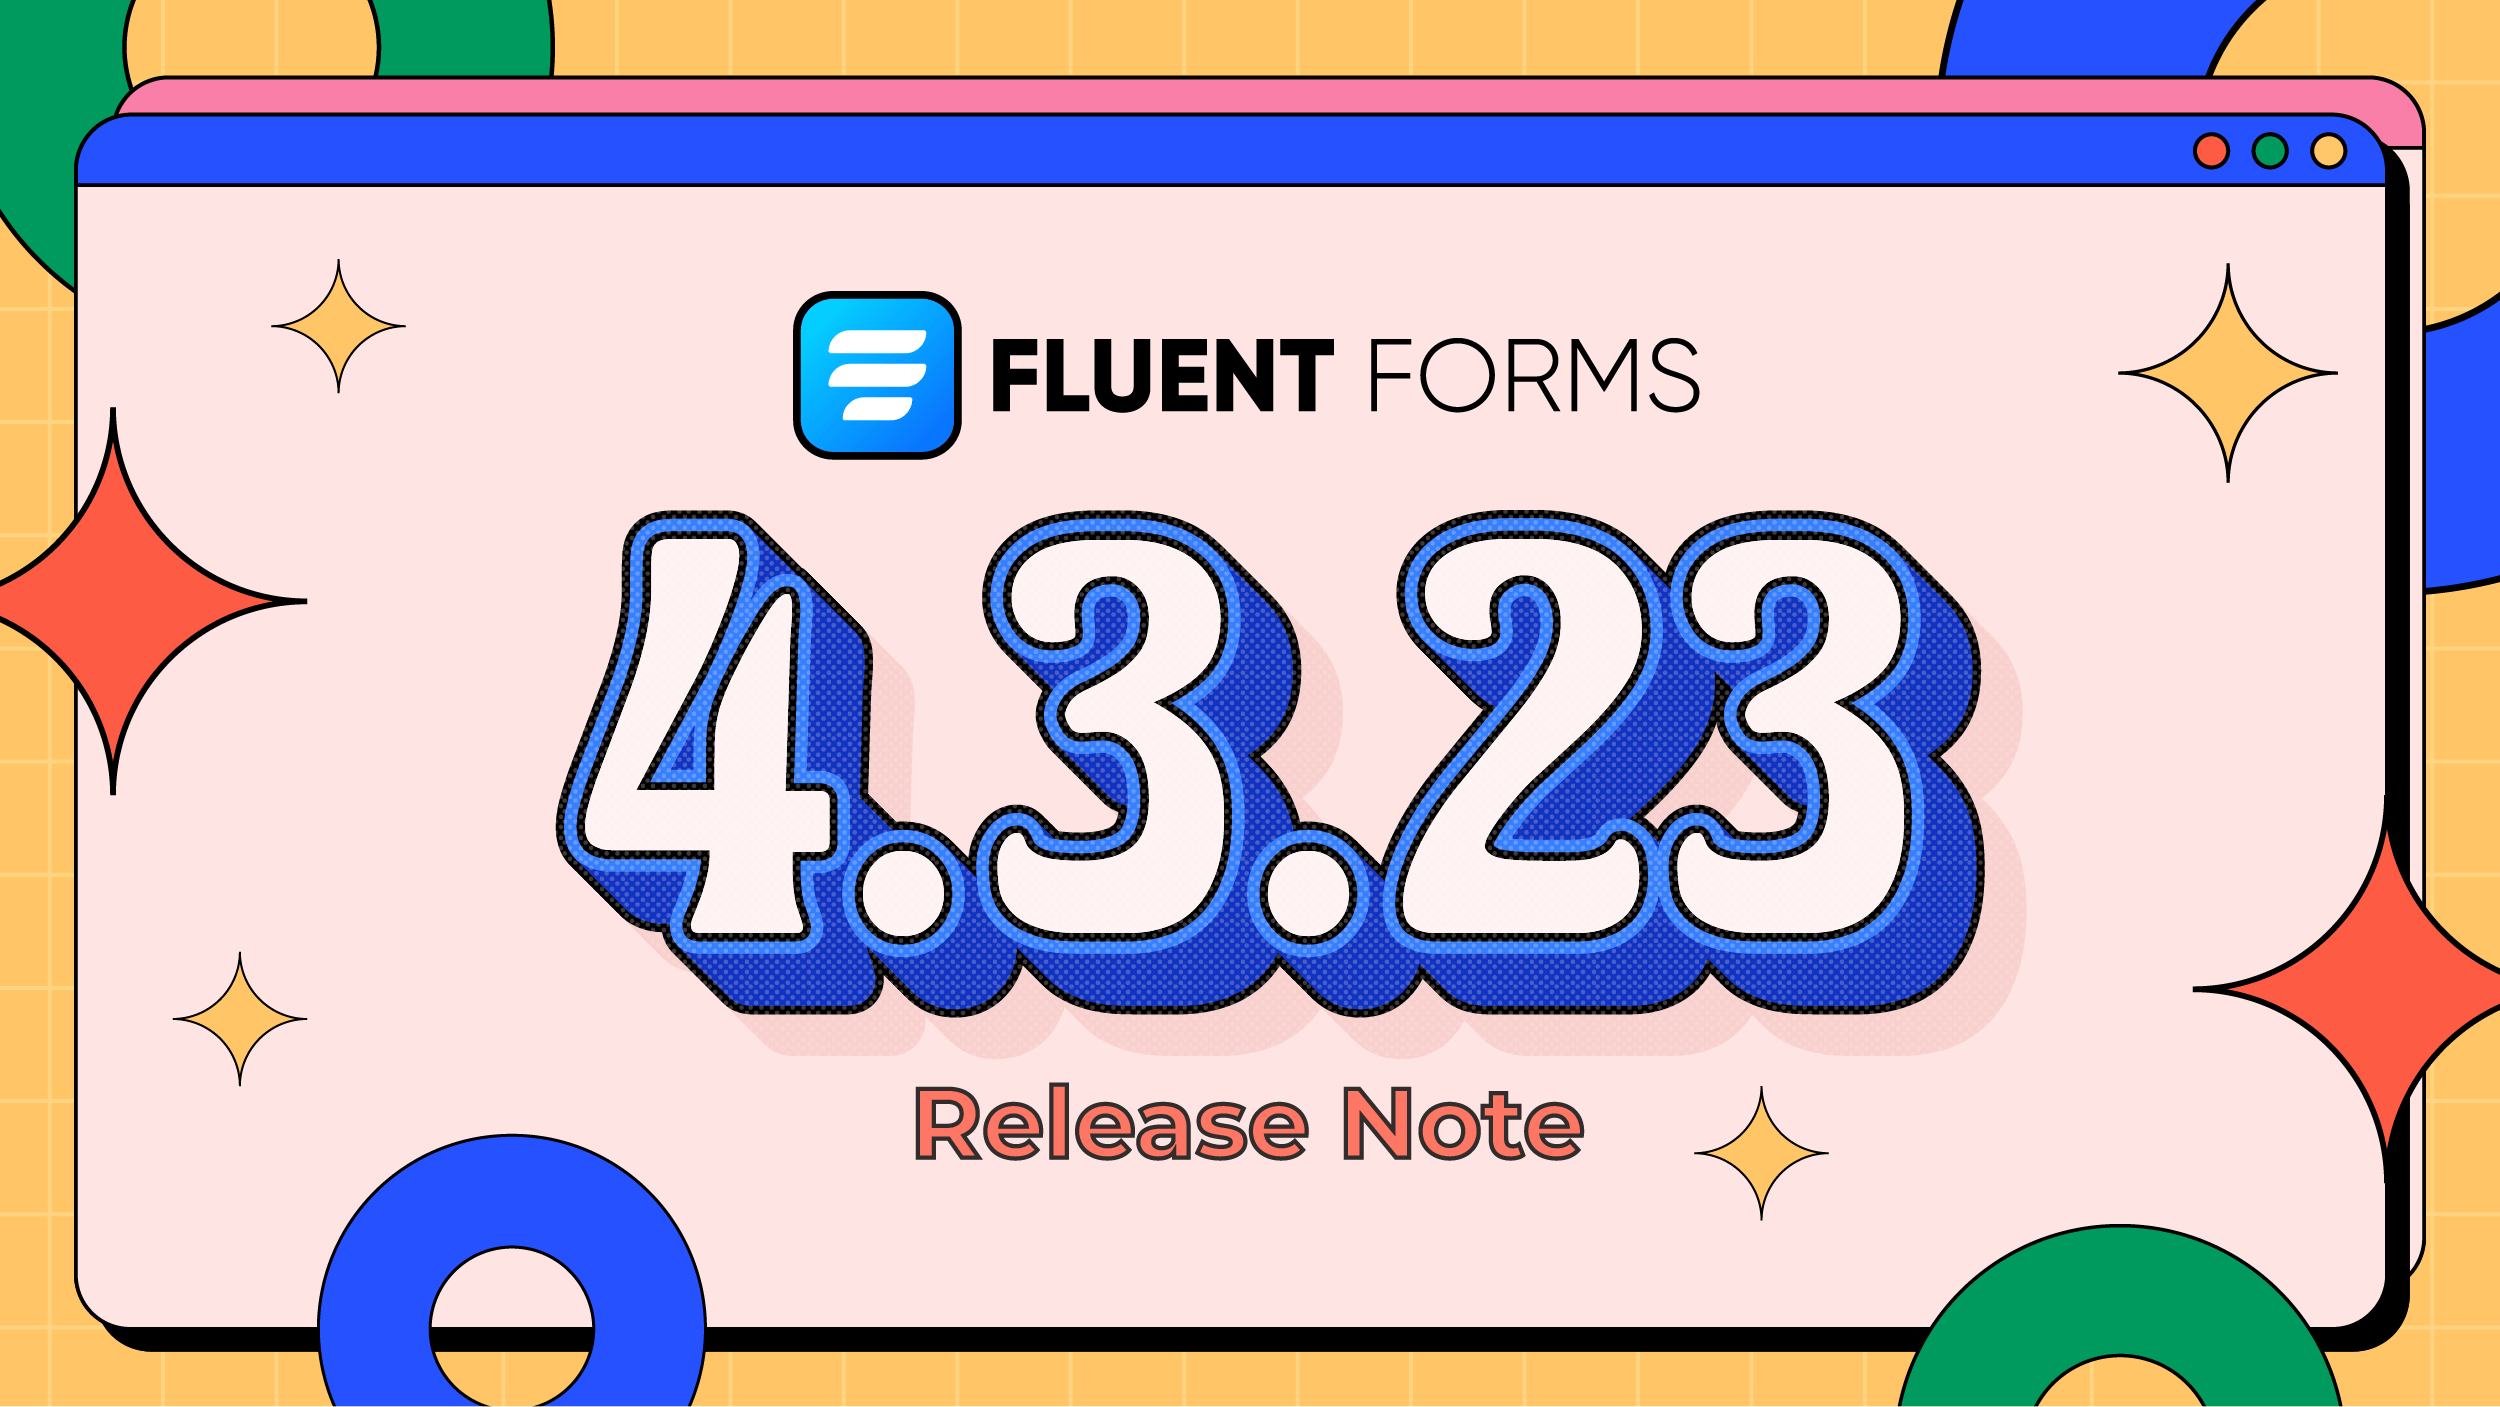 Fluent Forms update 4.3.23 release note